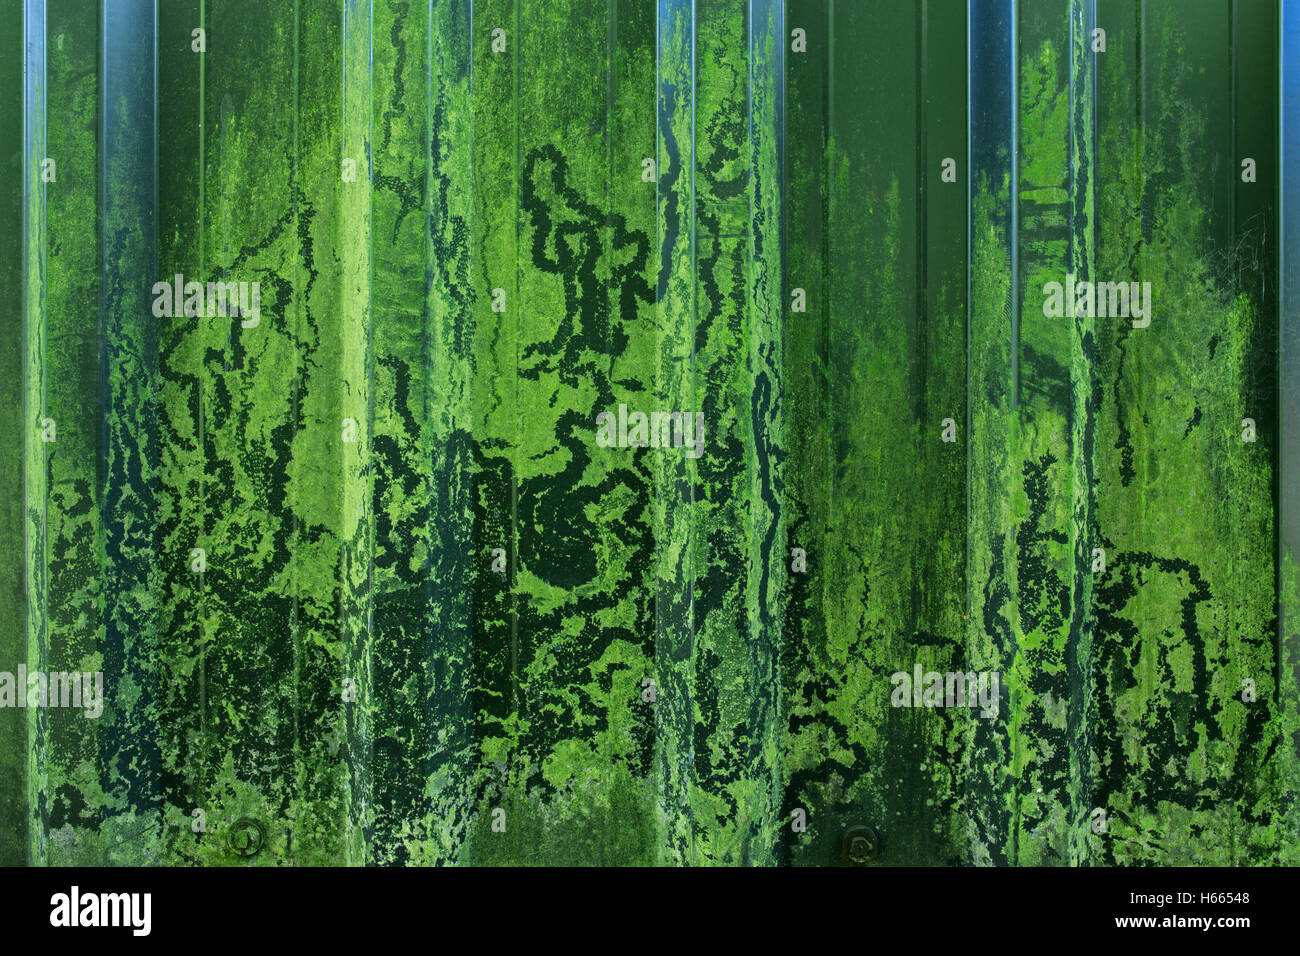 Patterns left by gastropods removing algae with their radulae. Stock Photo